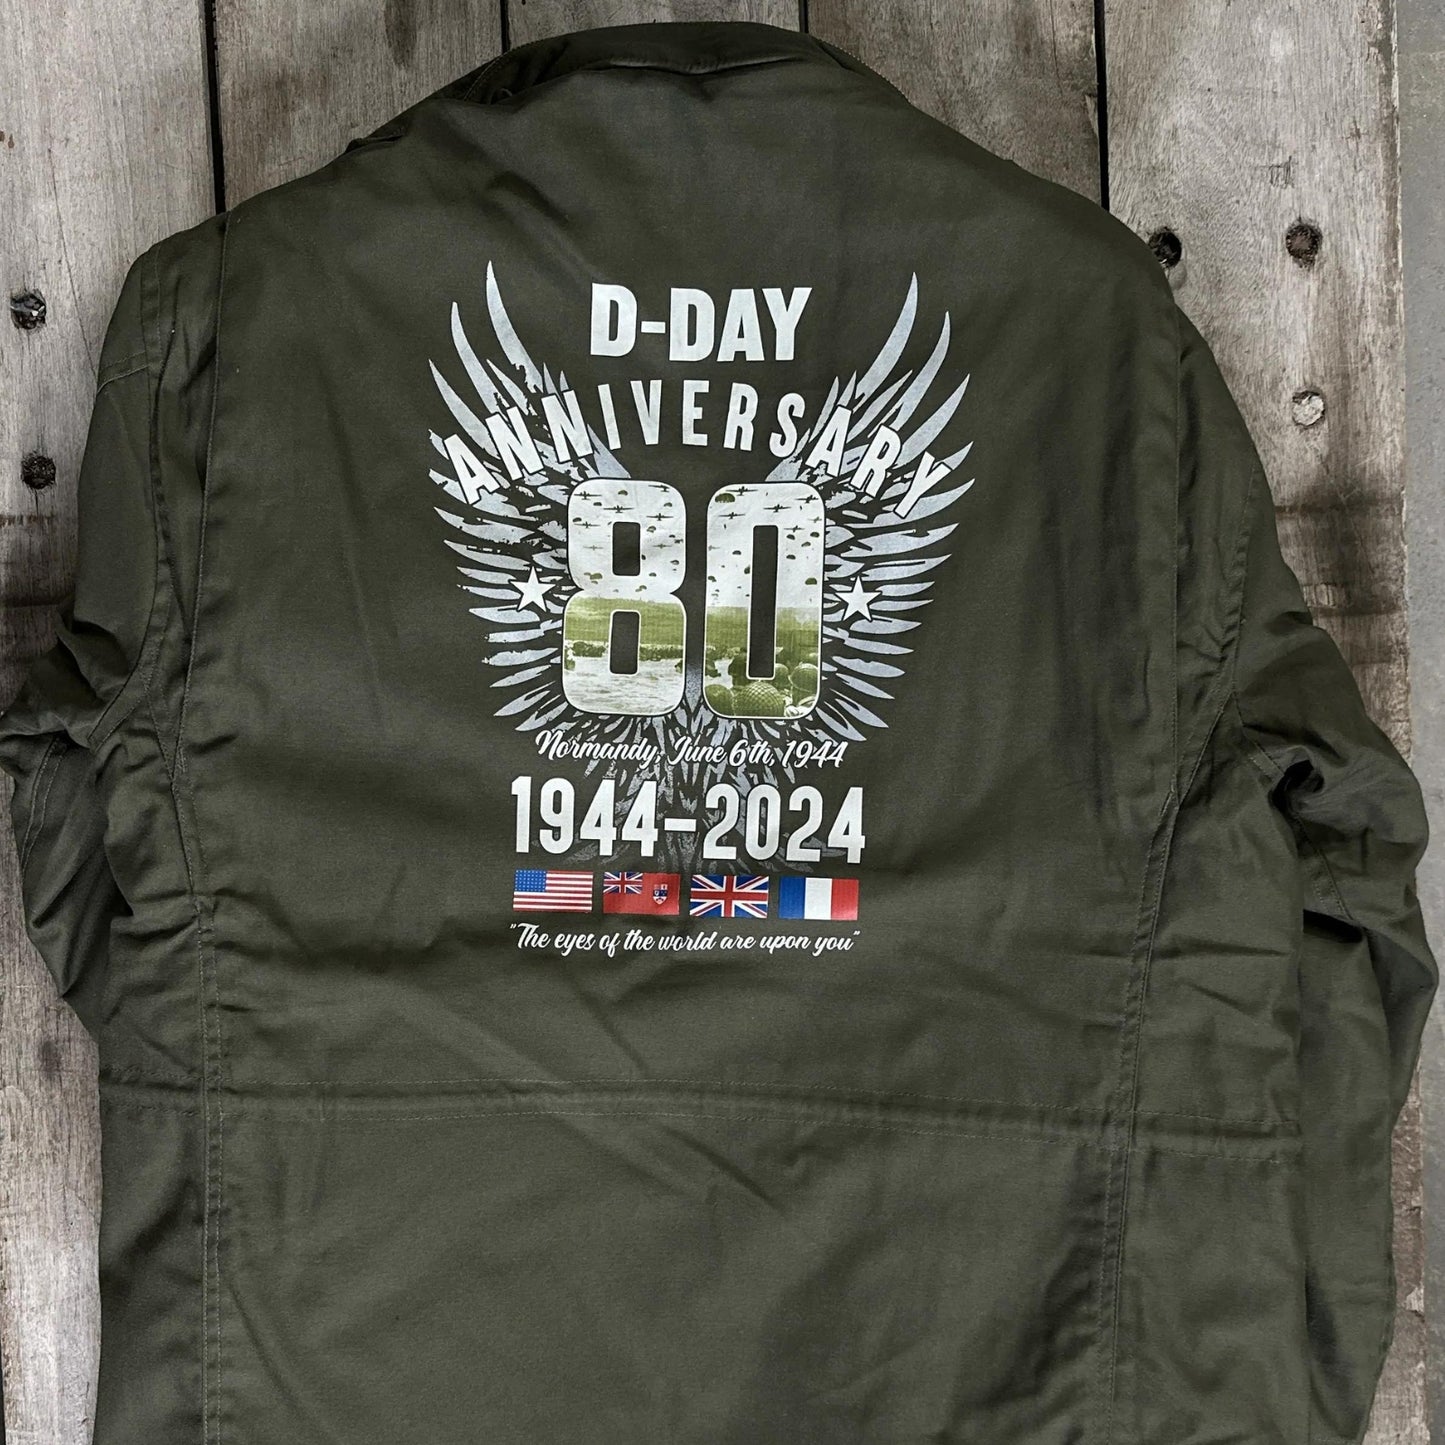 M65 Army field coats with original D-Day 80th Anniversary design and a 48-star flag